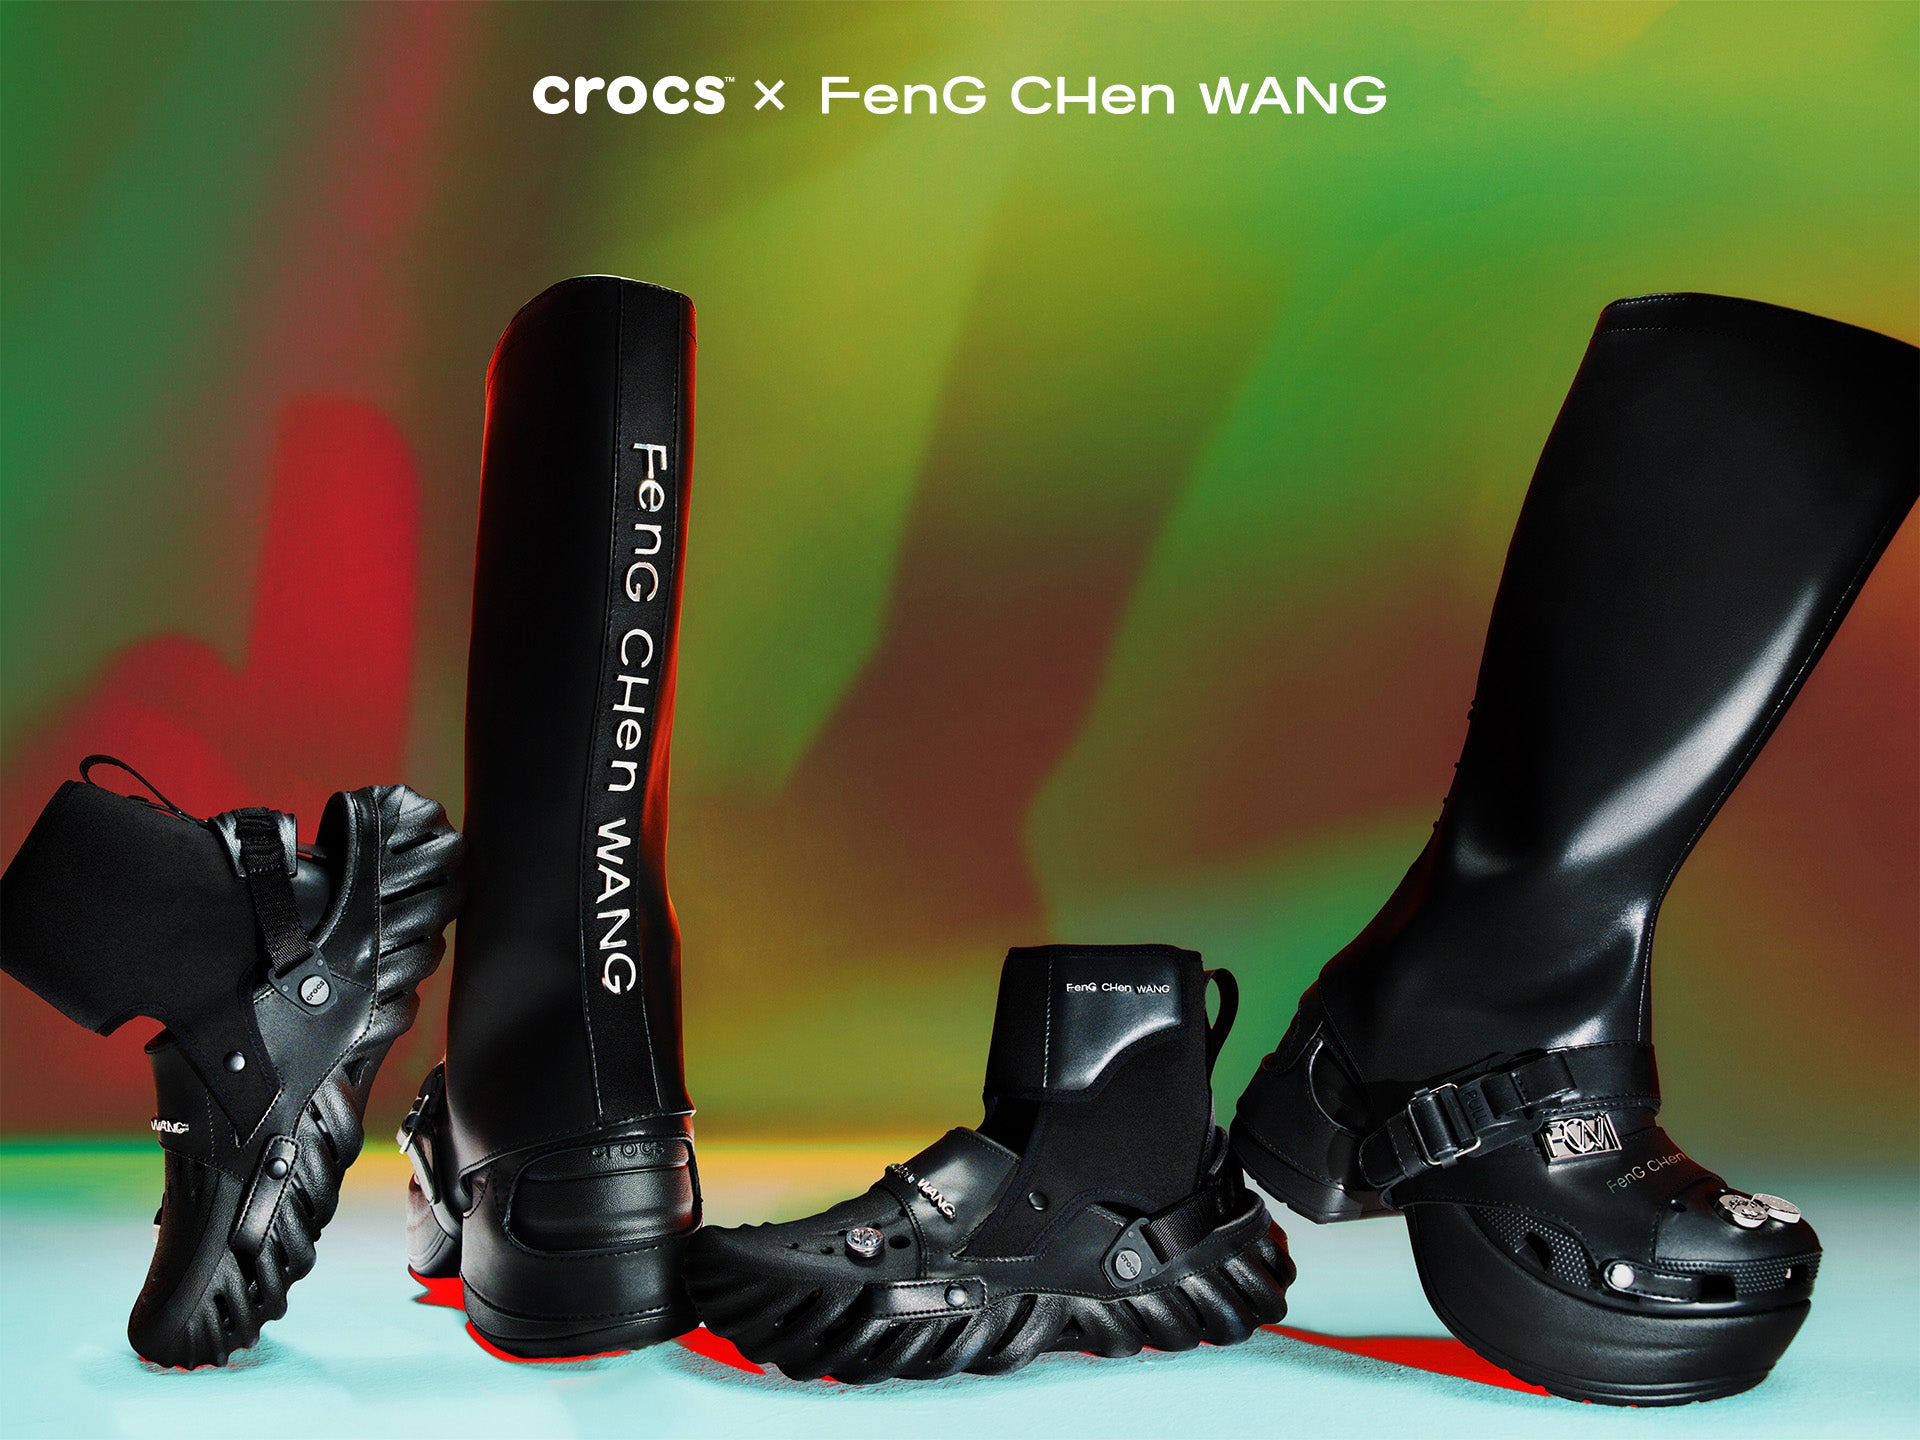 Ugg x Feng Chen Wang Campaign: The Perfect Shoe for Any Time